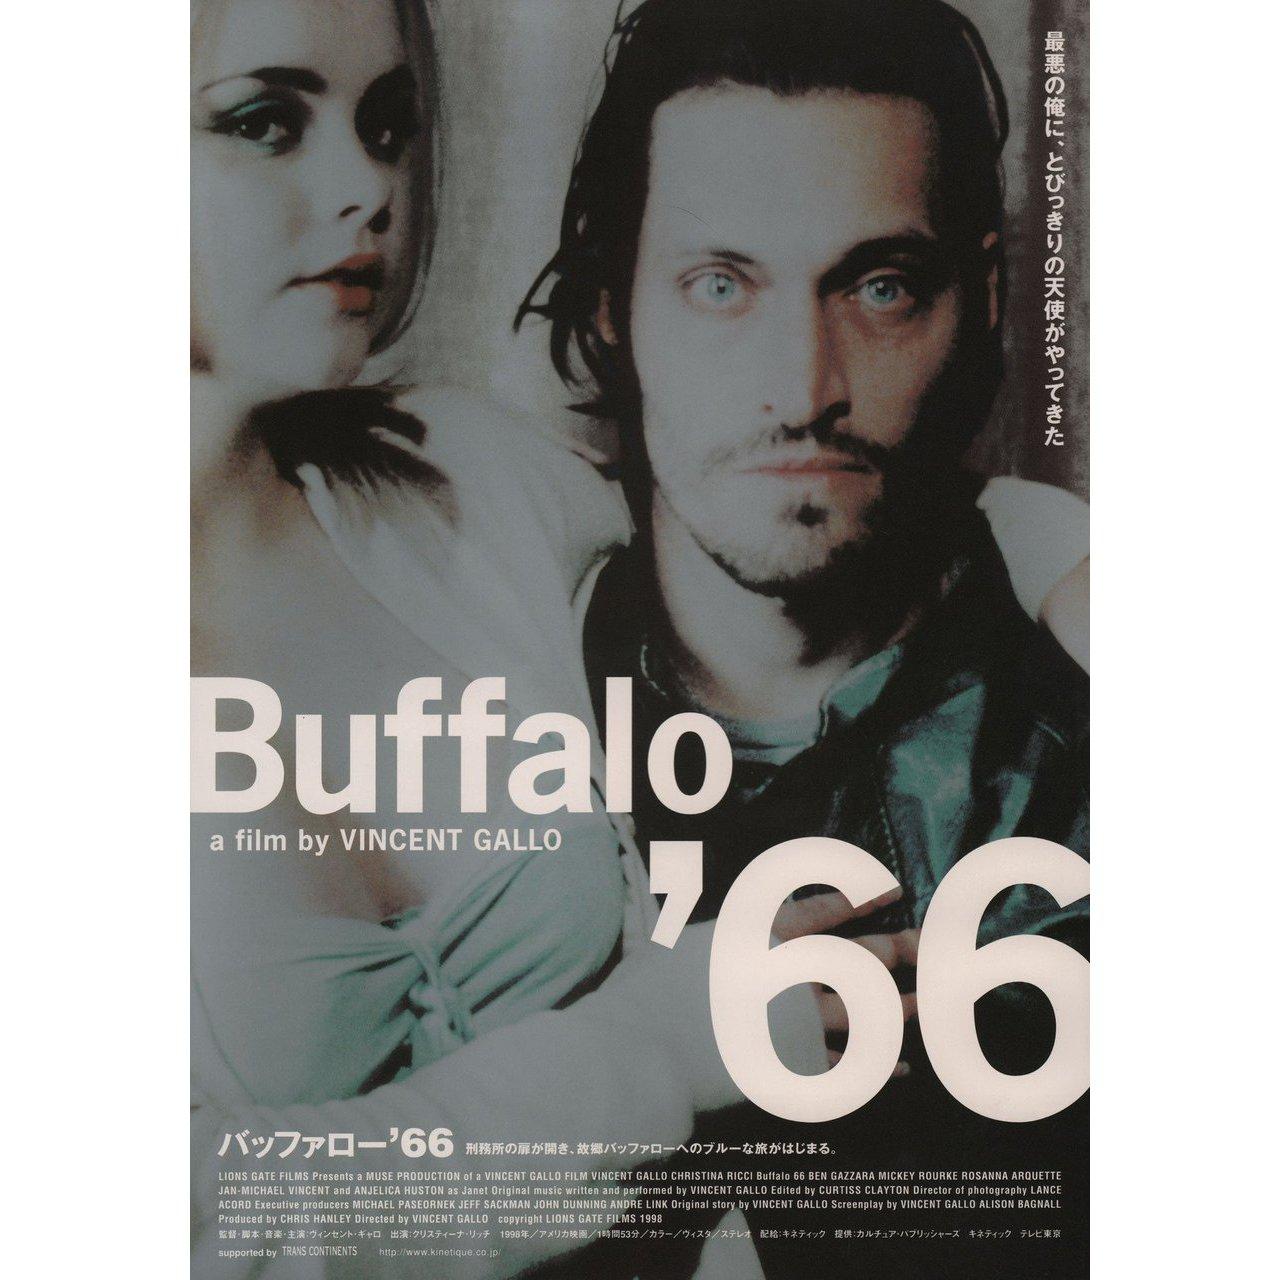 Original 1998 Japanese B2 poster for the film Buffalo '66 directed by Vincent Gallo with Vincent Gallo / Christina Ricci / Ben Gazzara / Mickey Rourke. Fine condition, rolled. Please note: the size is stated in inches and the actual size can vary by